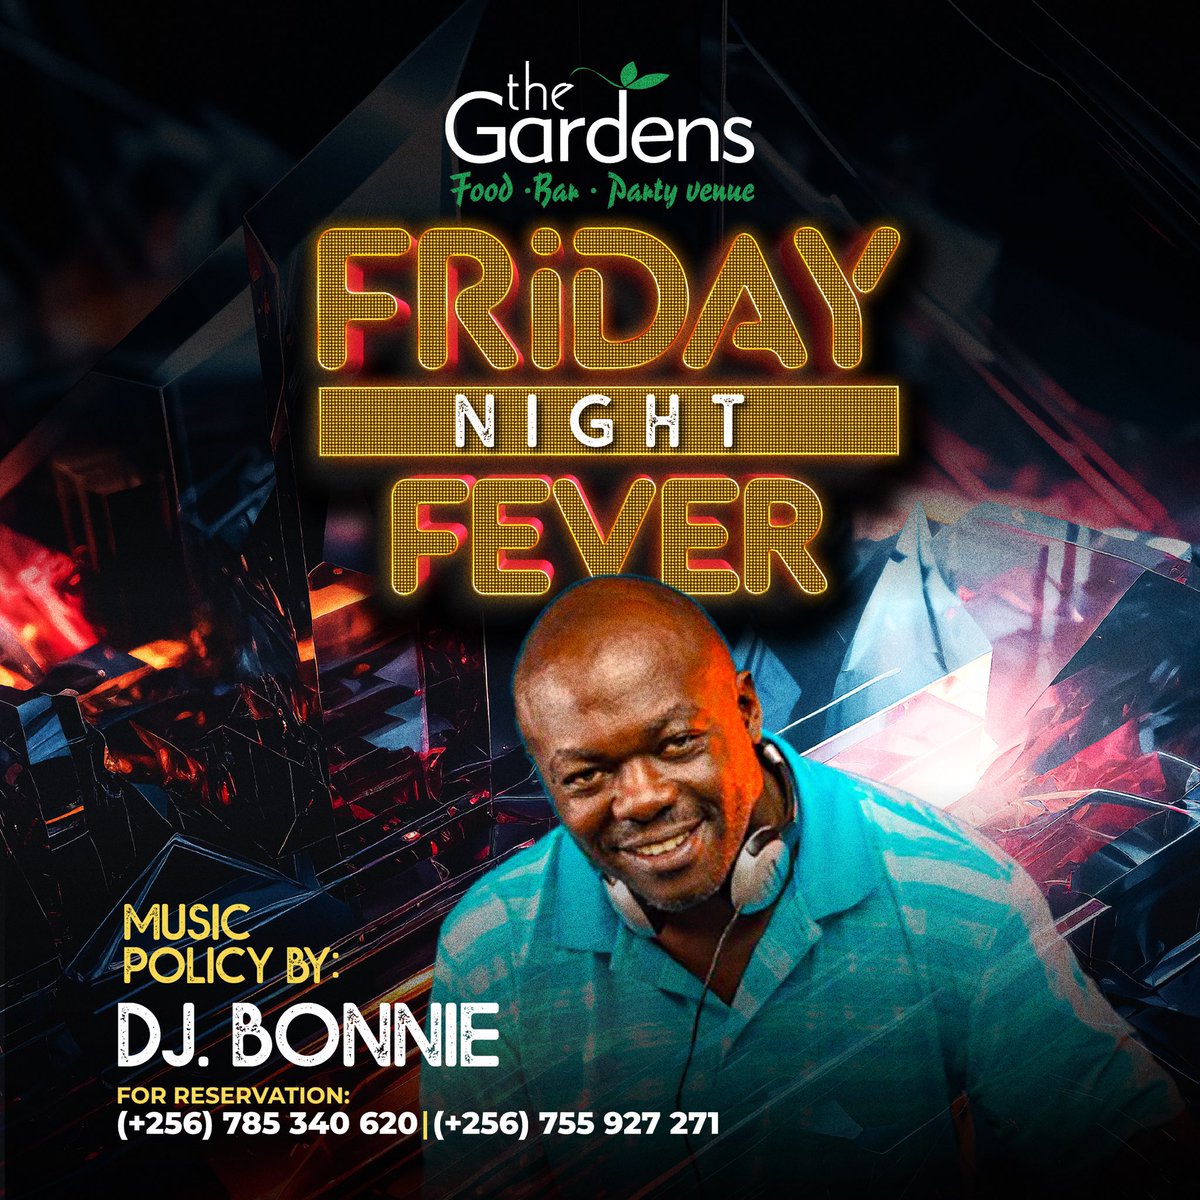 Friday is for unwinding @GardensNajjera is come and have a taste of #feelgoodmusic and #goodfood with @deejaybonni